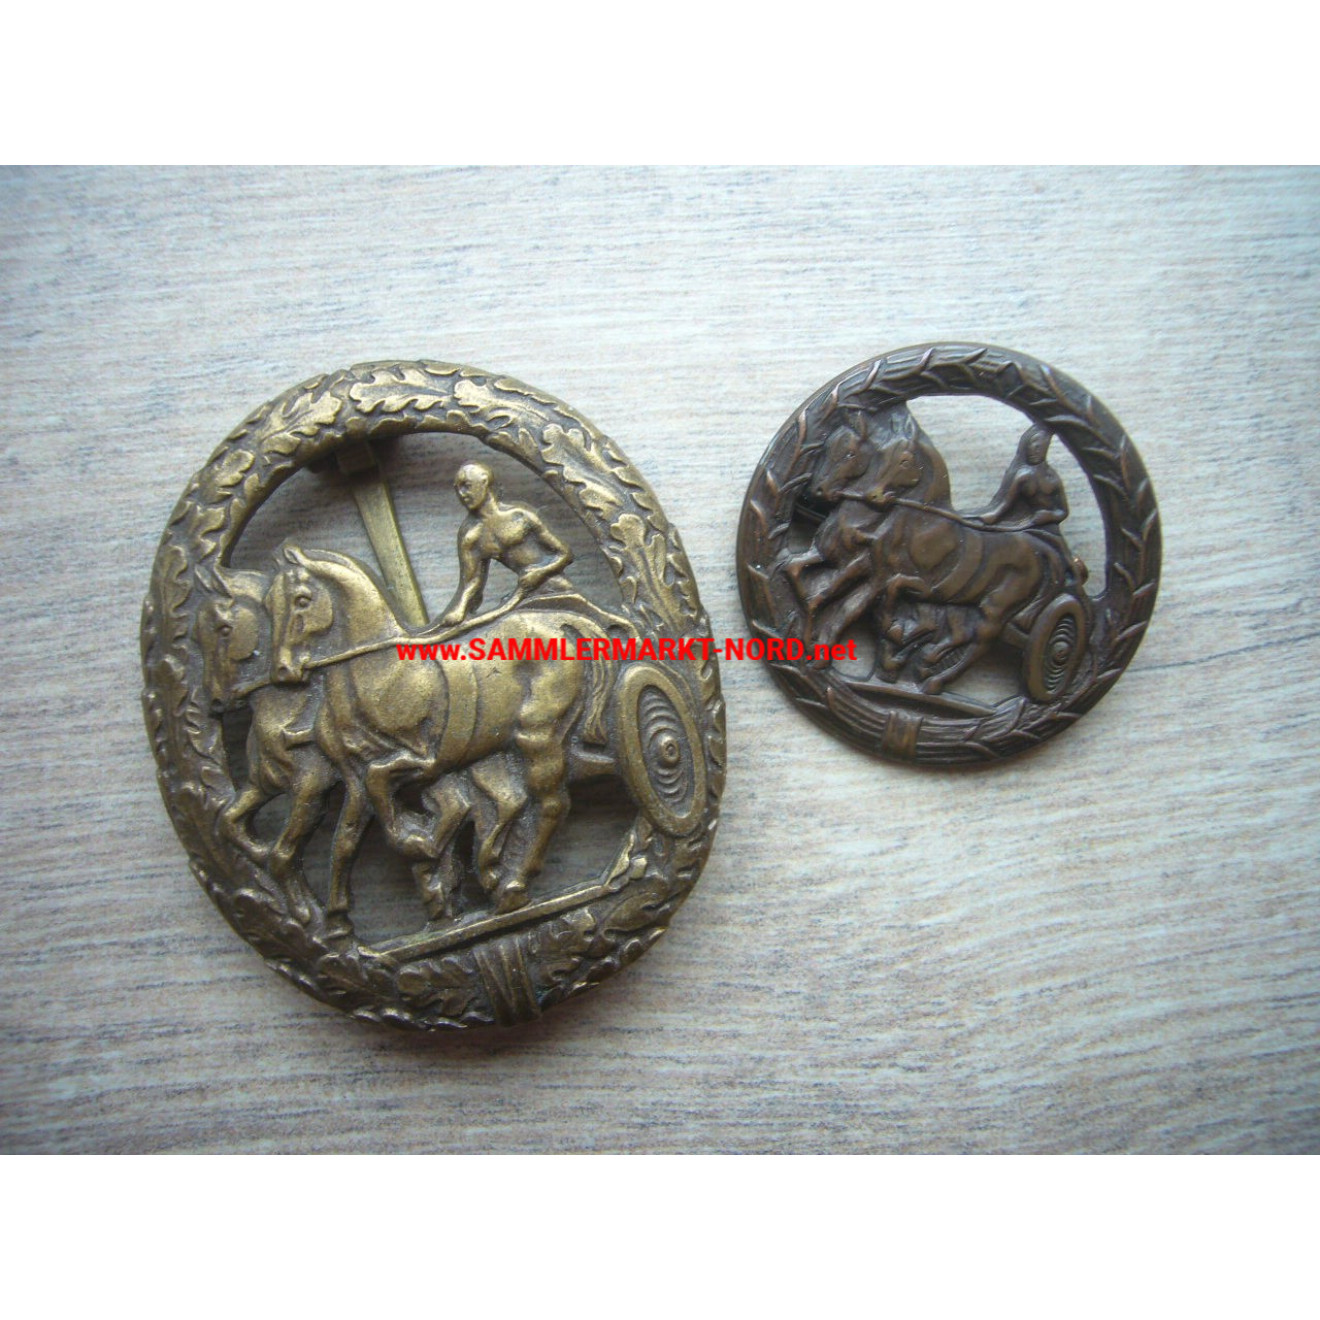 BRD - German Horse driver's badge in Bronze - Small & Large